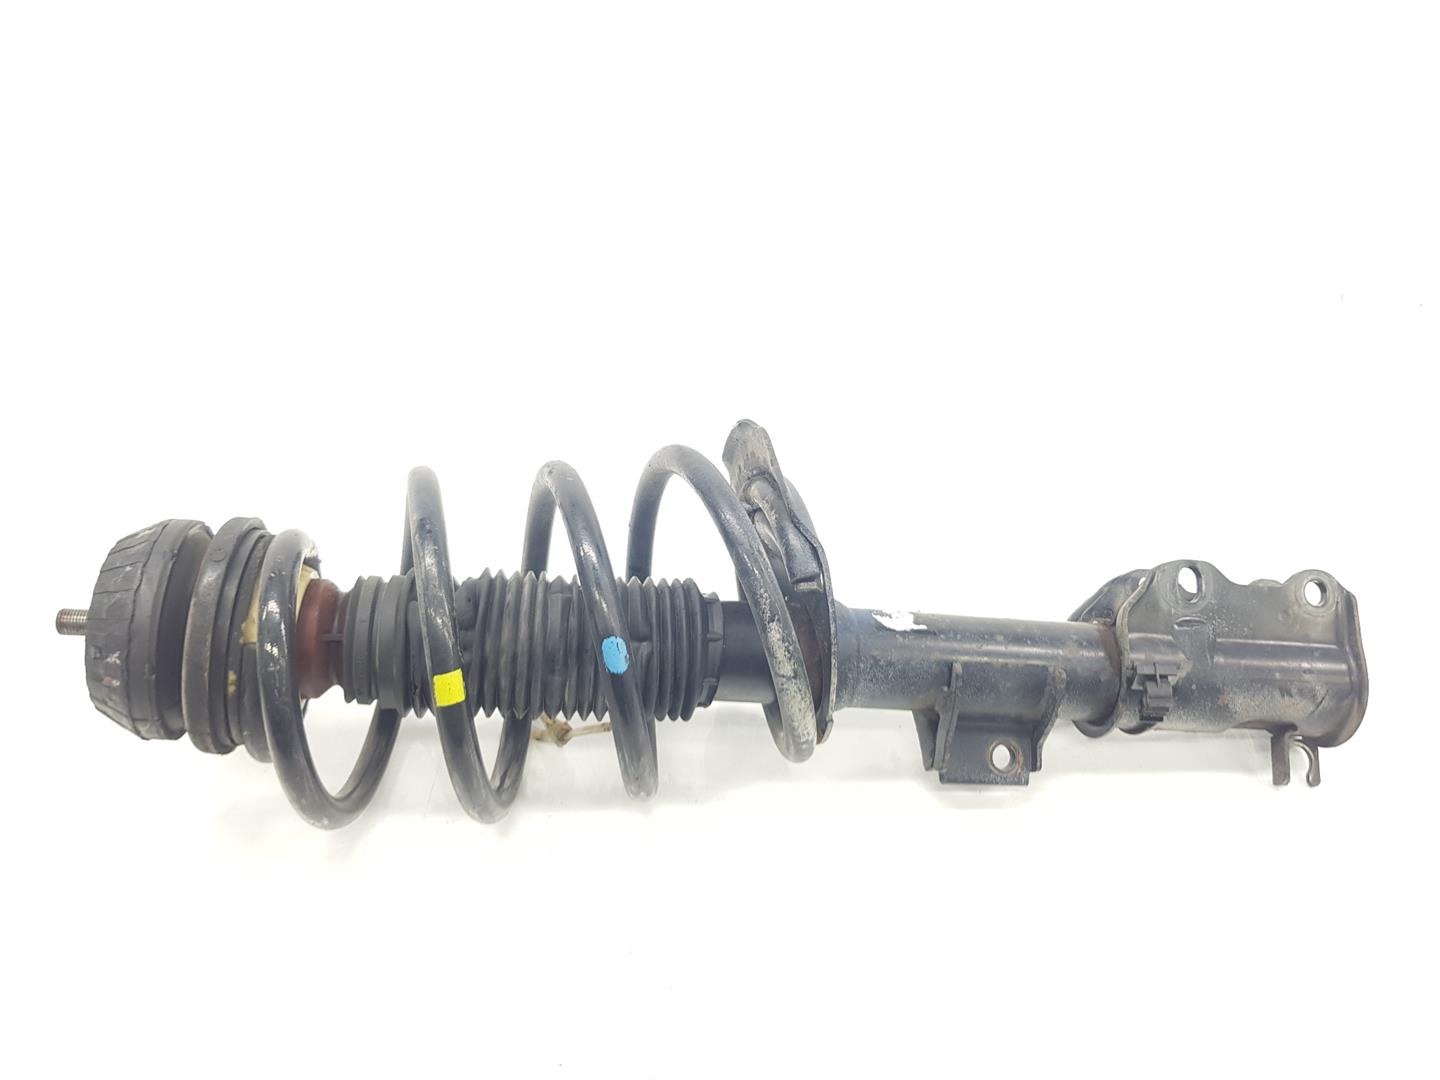 MERCEDES-BENZ Vito W639 (2003-2015) Front Right Shock Absorber A6393202113, A6393203613 23501644